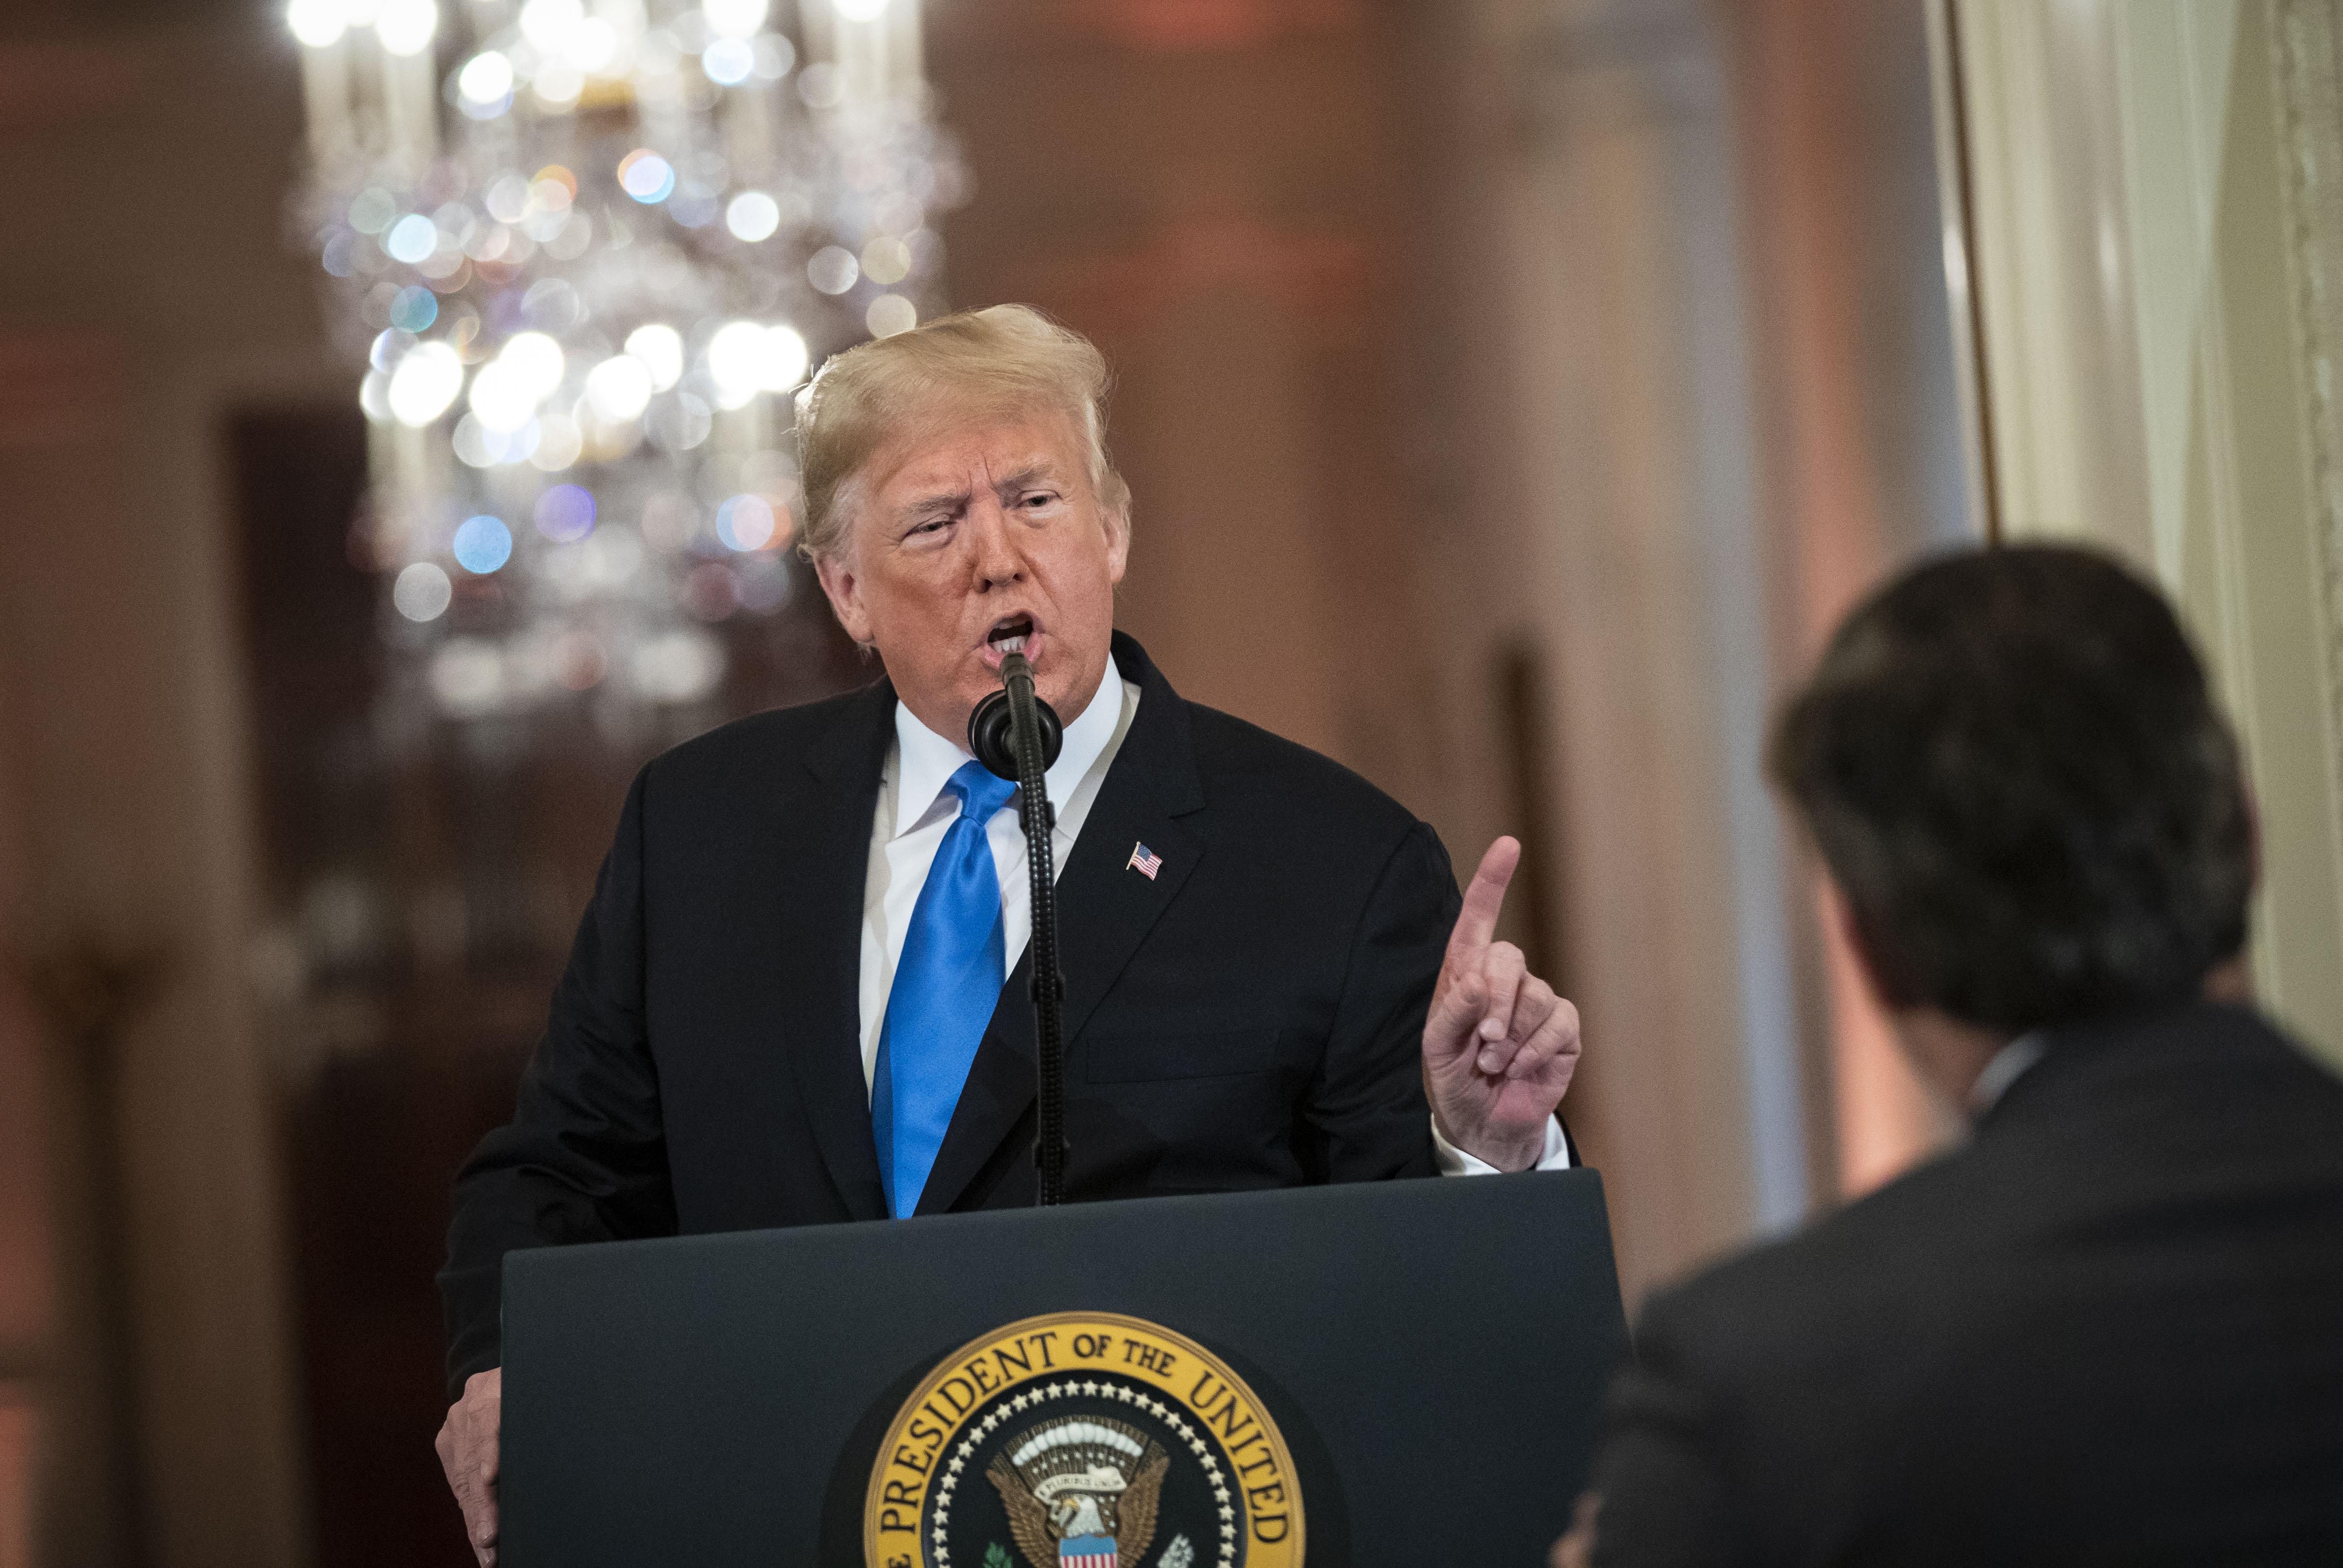 U.S. President Donald Trump gets into an exchange with CNN reporter Jim Acosta during a news conference a day after the midterm elections on November 7, 2018 in the East Room of the White House in Washington, DC. Republicans kept the Senate majority but lost control of the House to the Democrats. 